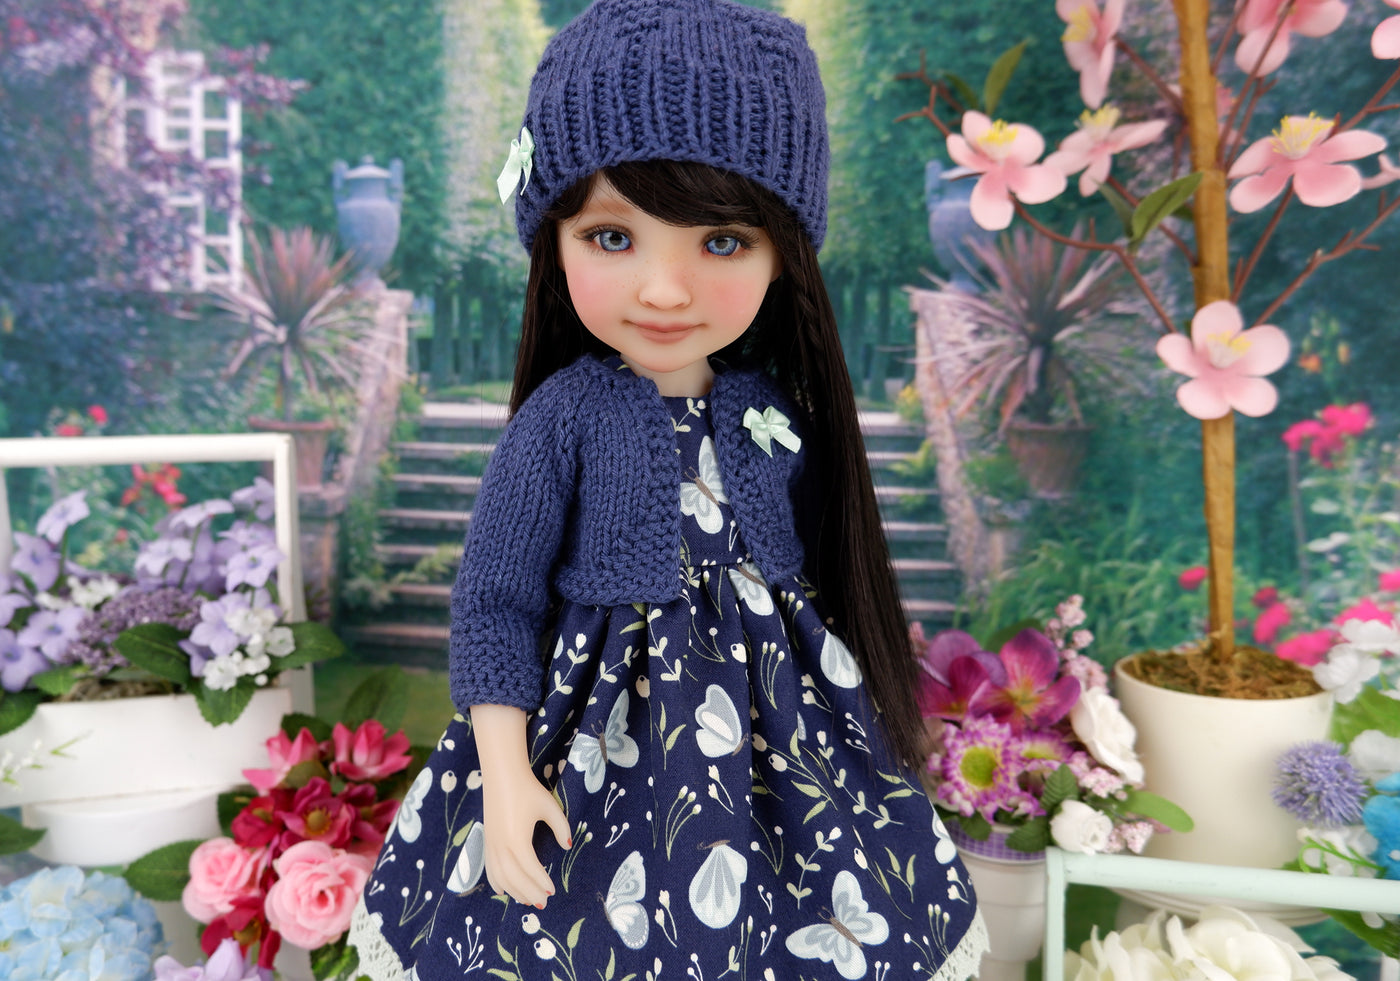 Delicate Butterfly - dress and sweater set with shoes for Ruby Red Fashion Friends doll